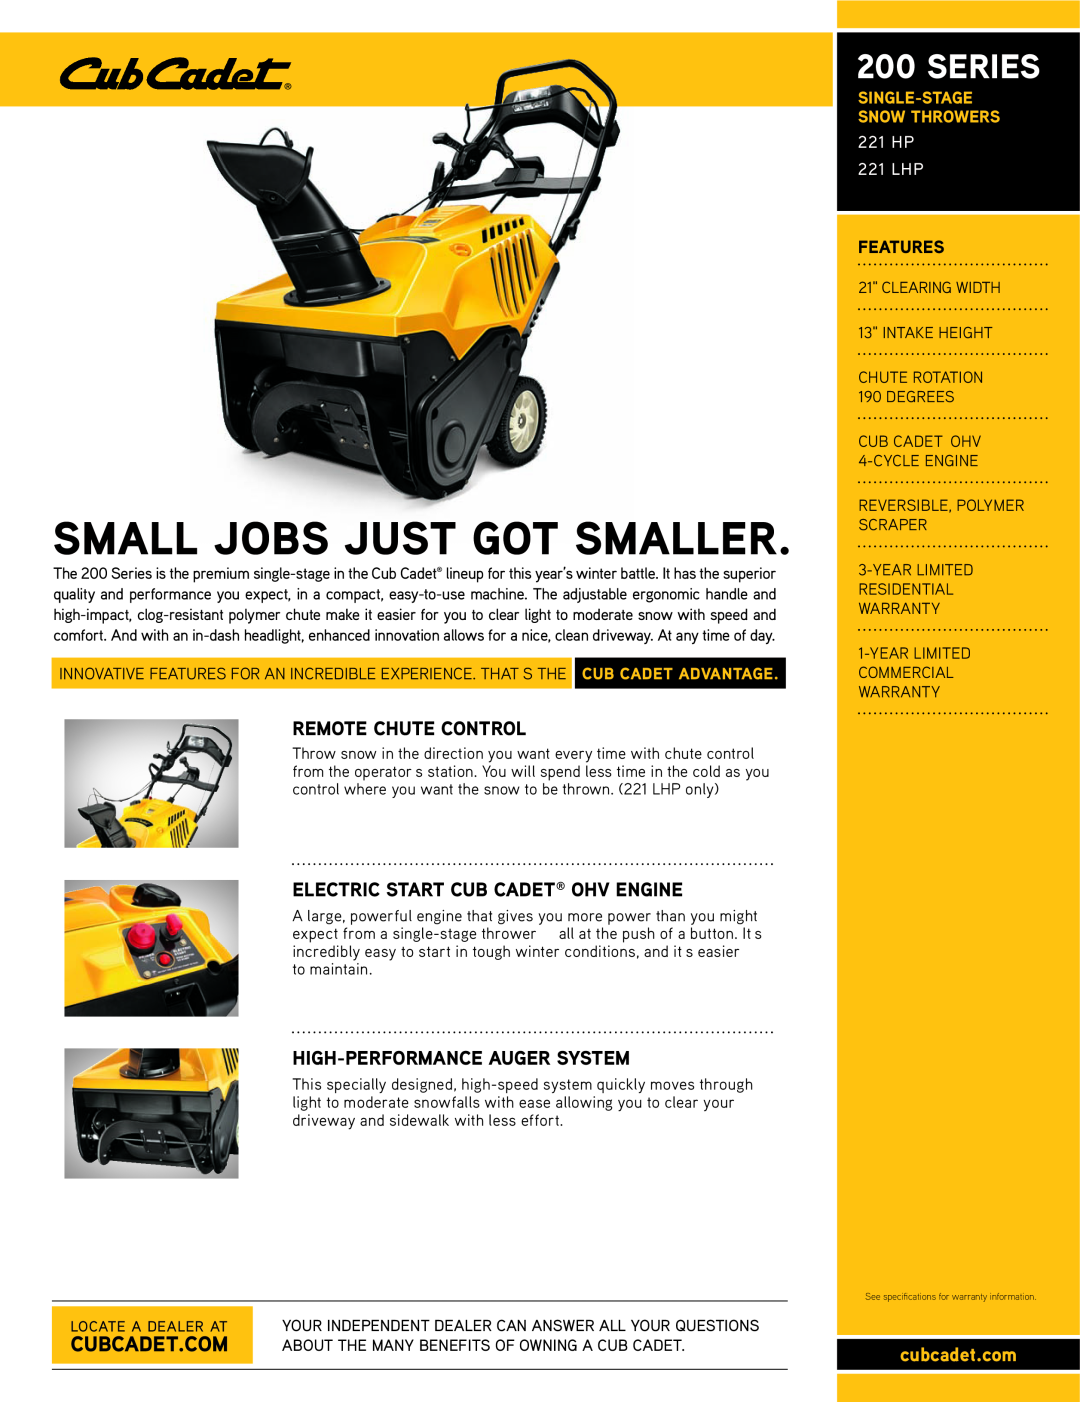 Cub Cadet 221 LHP specifications Series, Small Jobs Just Got Smaller, Remote Chute Control, High-Performanceauger System 